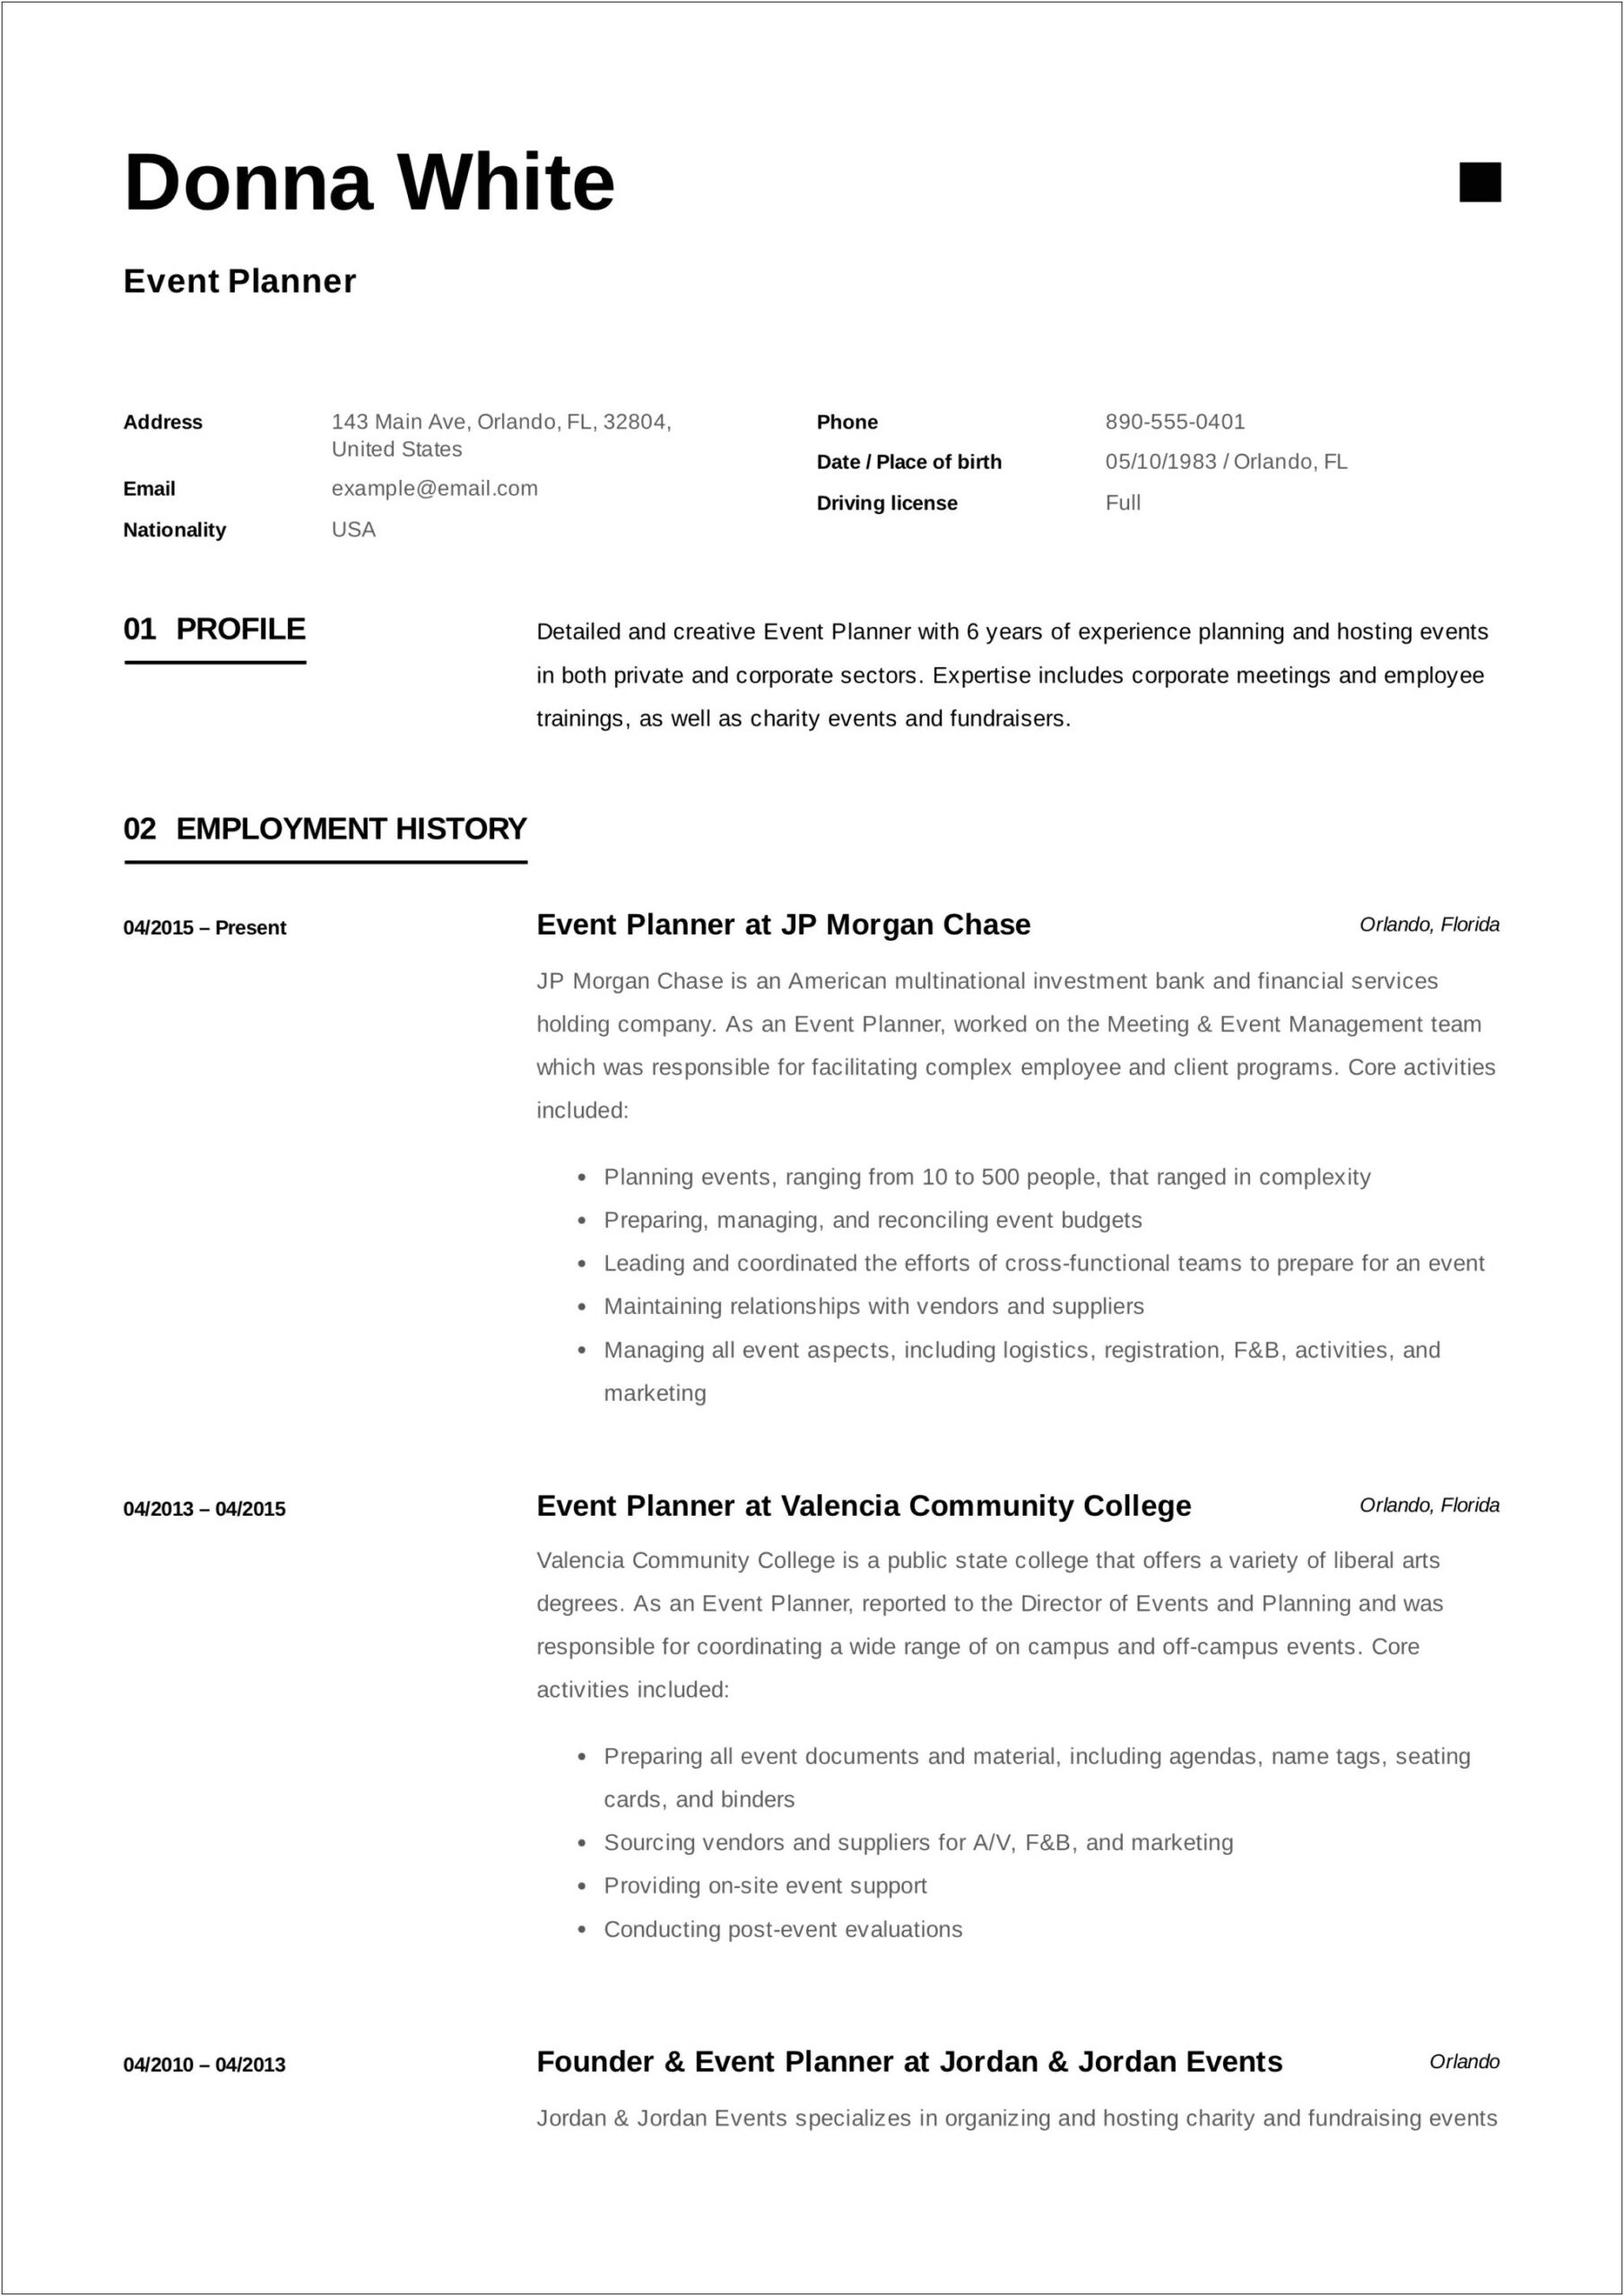 Event Planner Resume Objective Examples